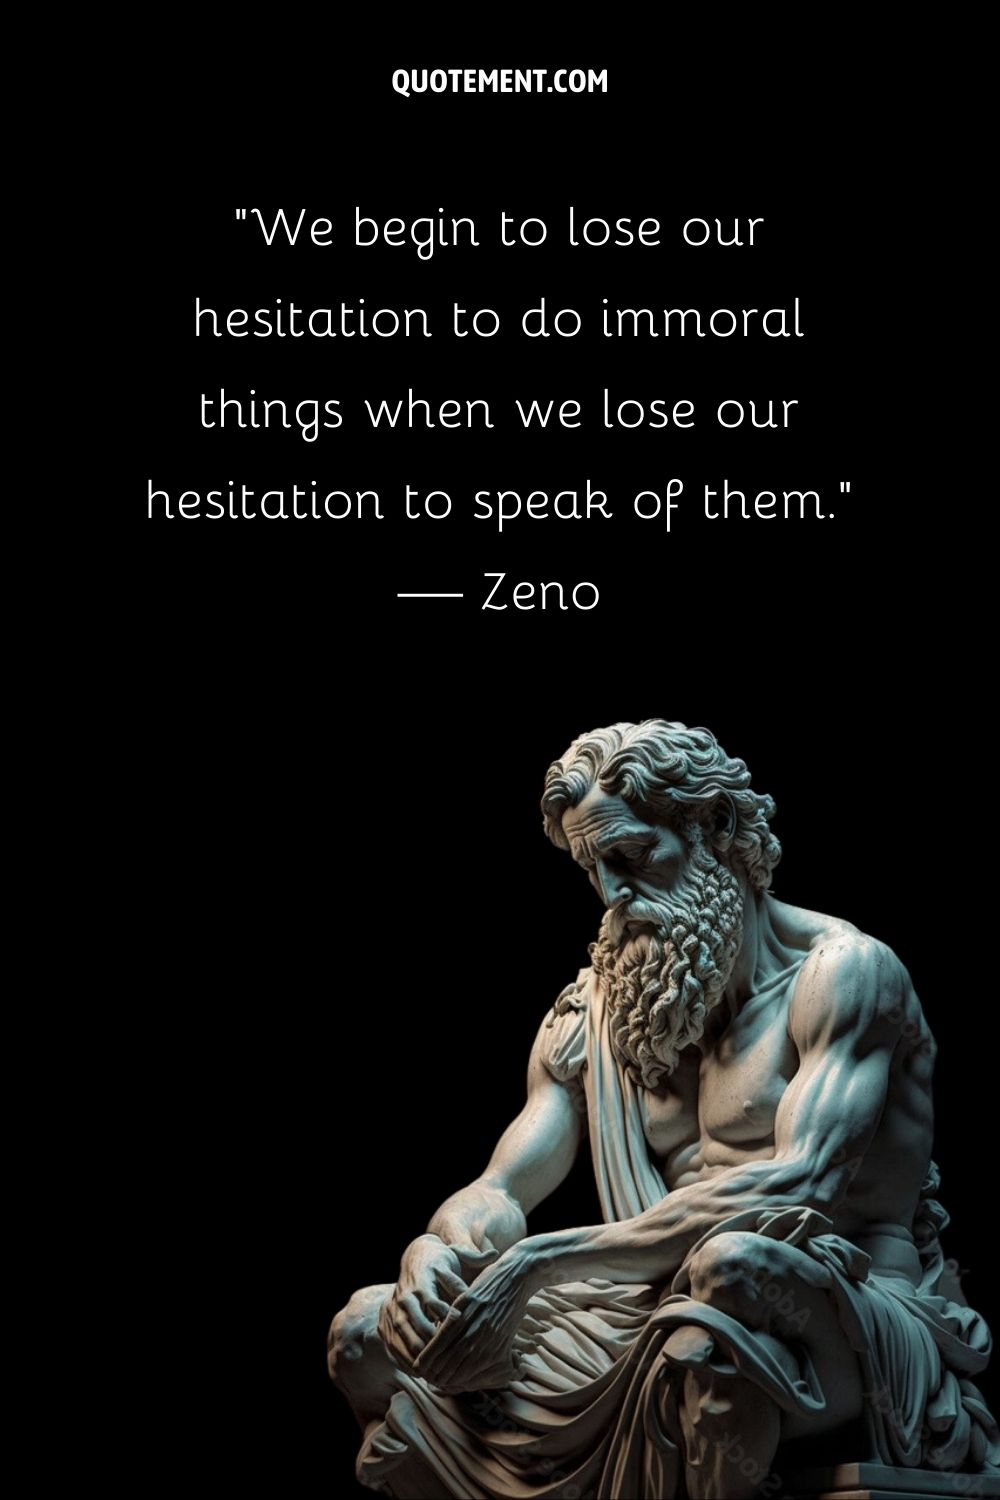 Carved stoic wisdom echoes through silent marble.